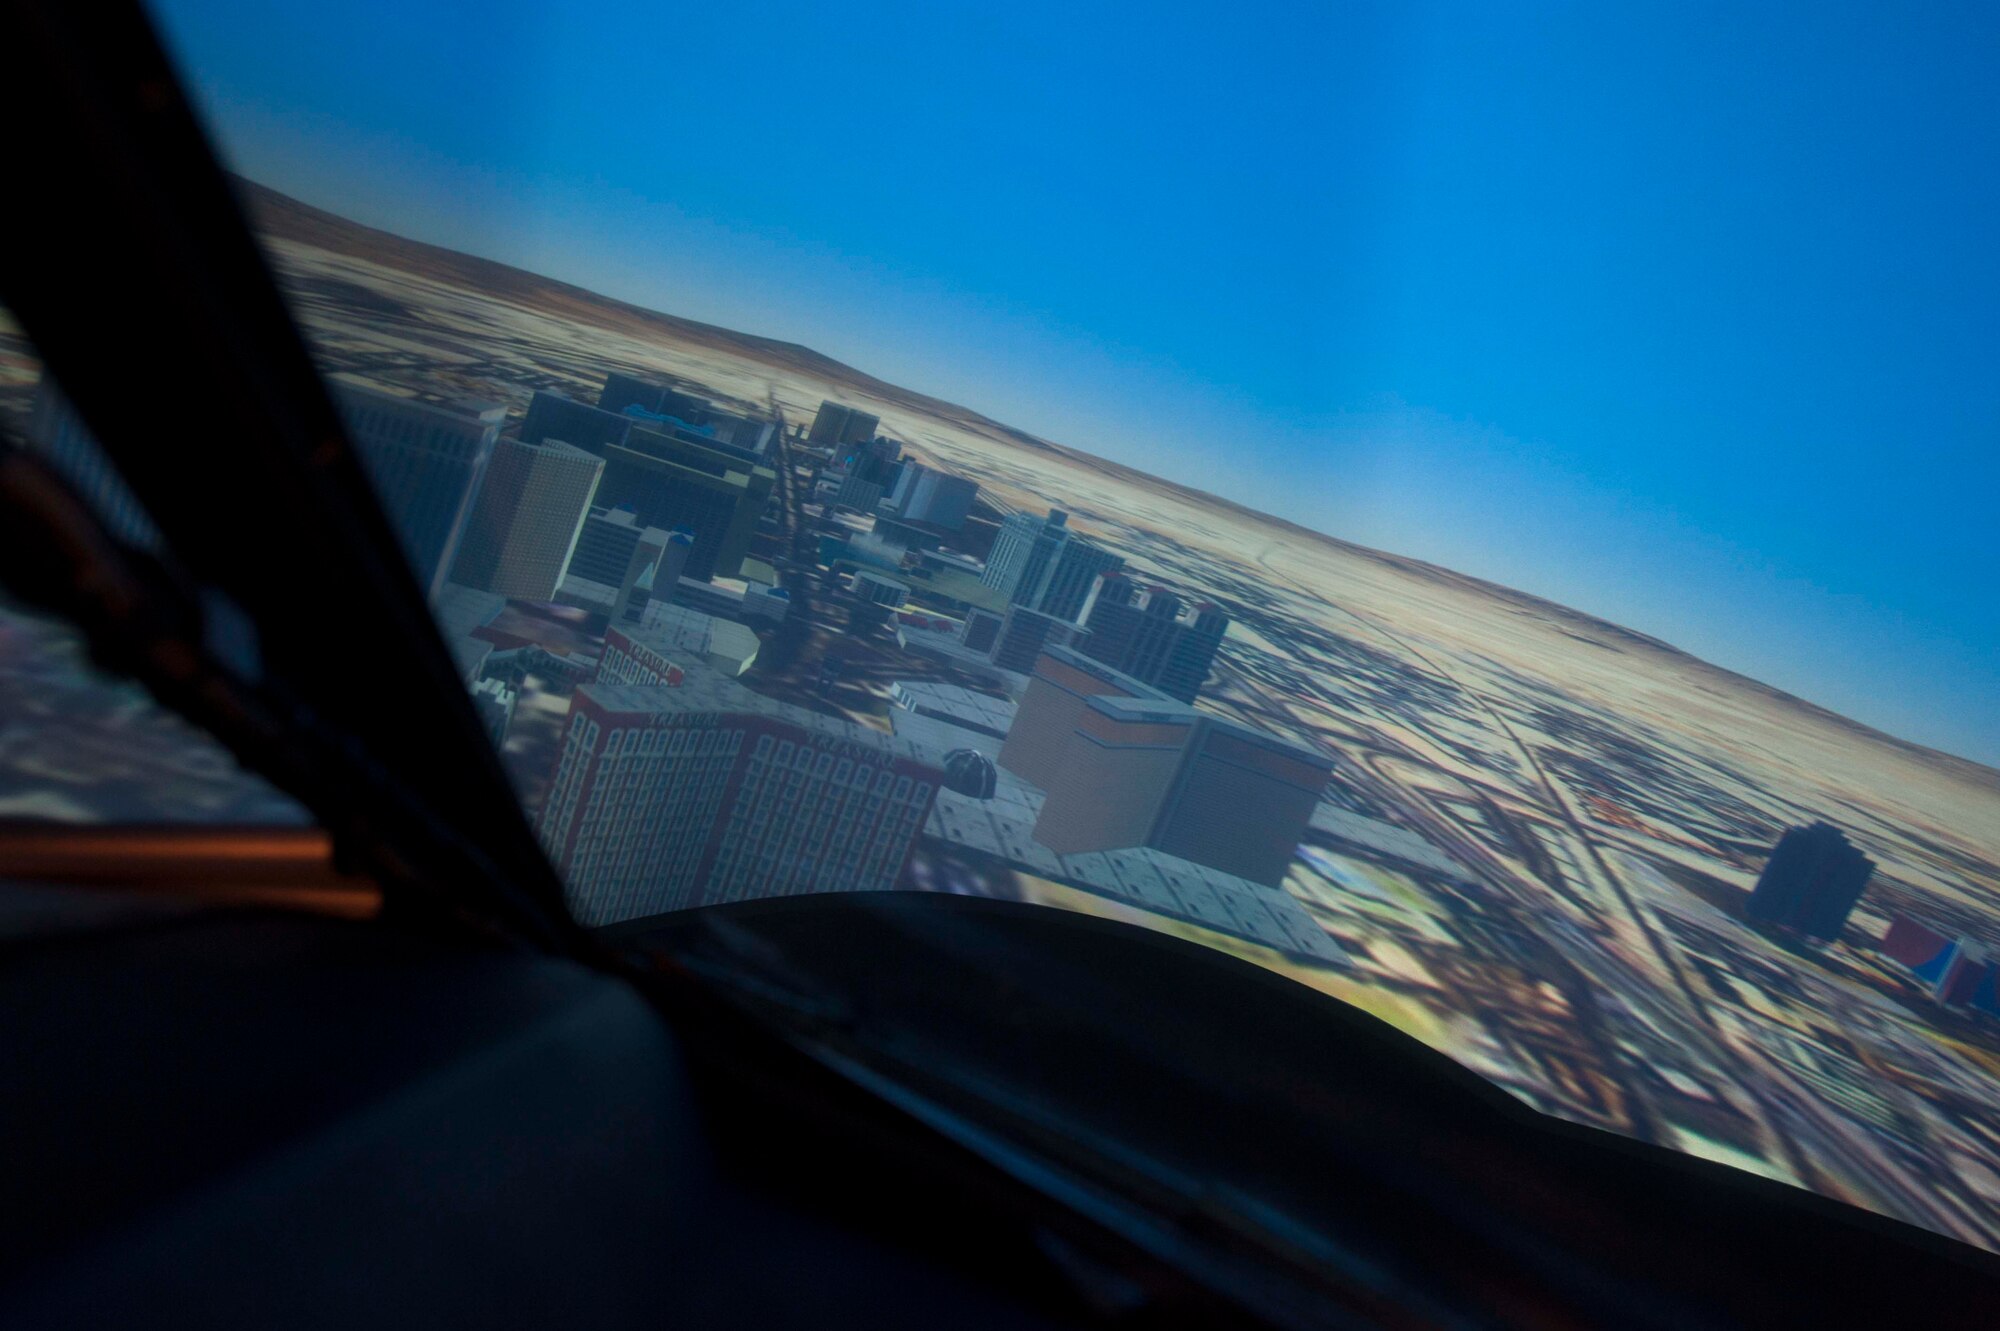 A simulation of the Las Vegas strip is viewed from the cockpit of the B52-H Stratofortress weapons system trainer during a simulated flight on Minot Air Force Base, N.D., Dec. 3, 2014. The WST conducts two large force exercises per week in addition to virtual flag exercises that last nine days and consist of five missions. They also partner with Airborne Warning and Control Squadrons, River Joints who identify ground threats and radars and tactical air control parties. (U.S. Air Force photo/Senior Airman Stephanie Morris)